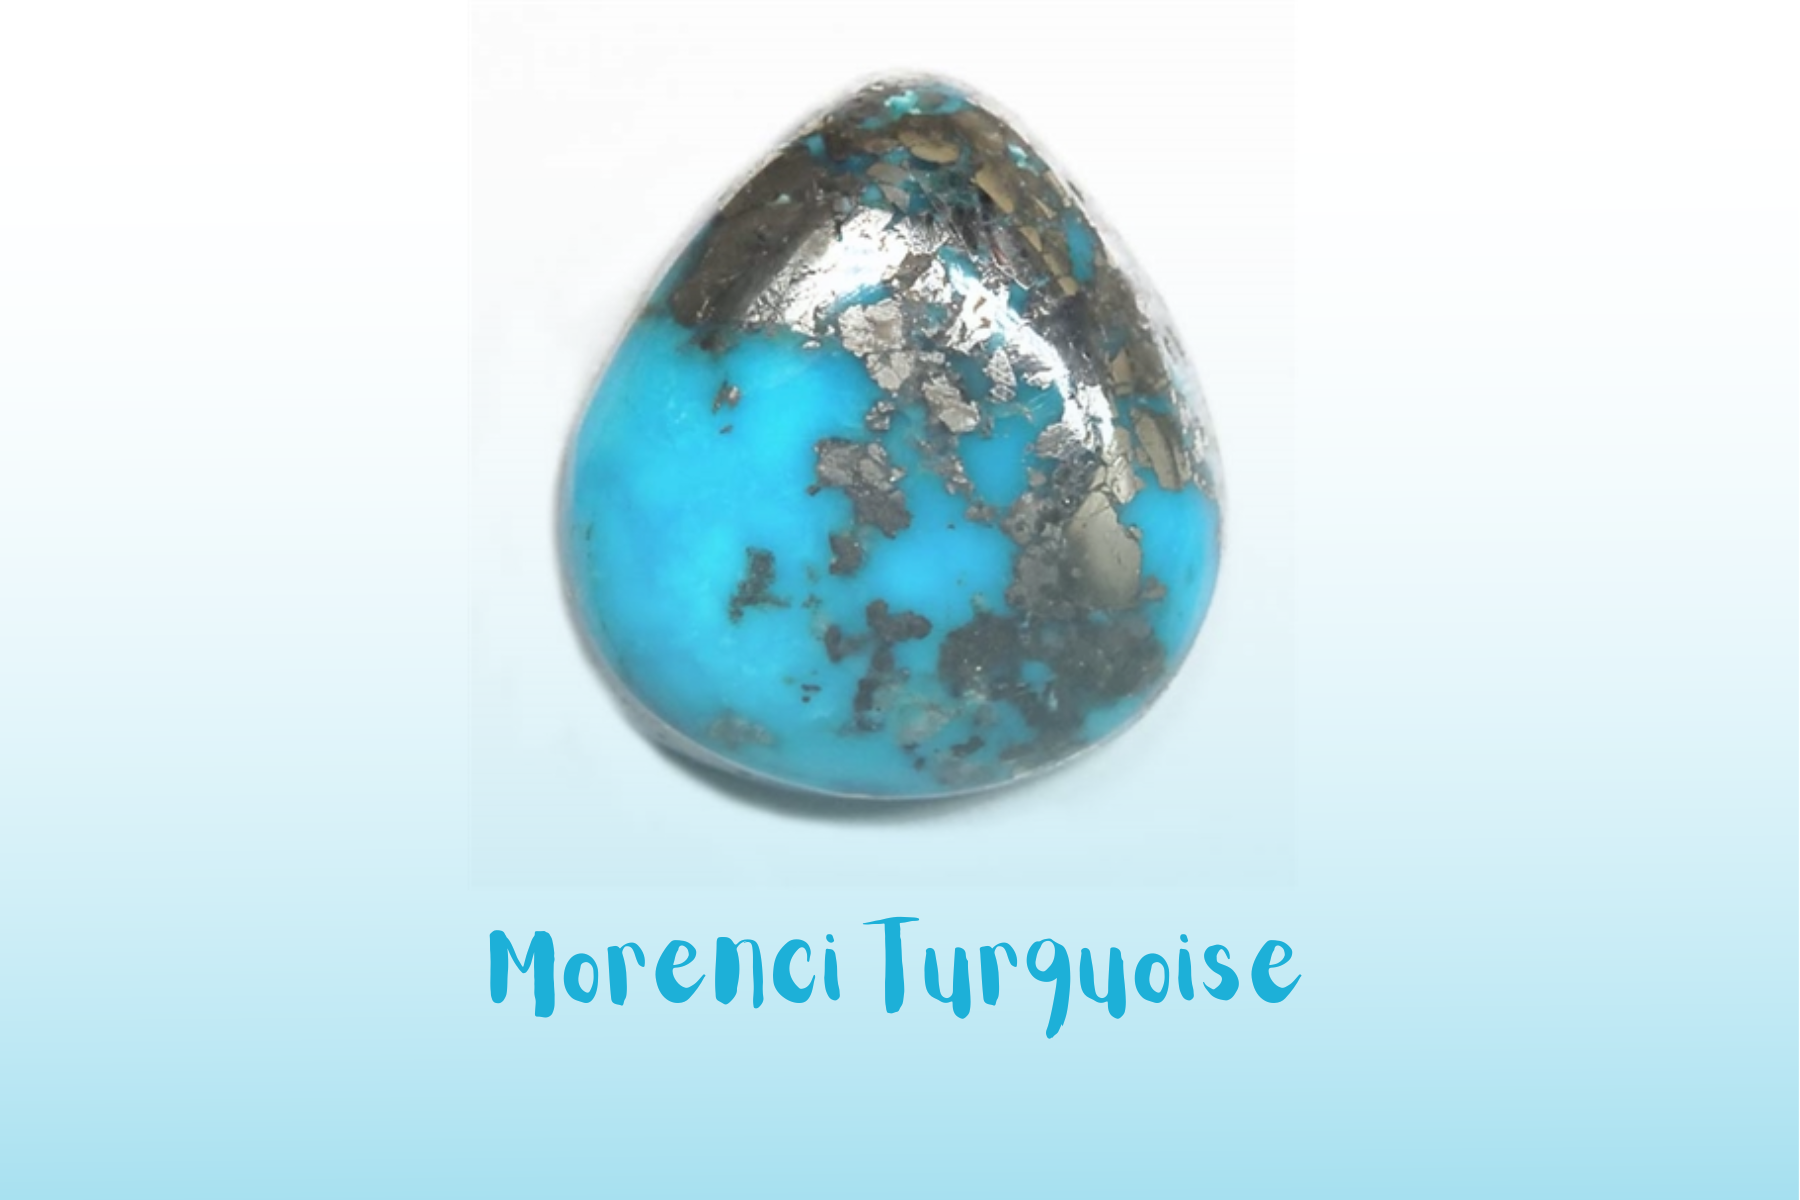 Morenci turquoise stone in the shape of a teardrop with black and blue shades